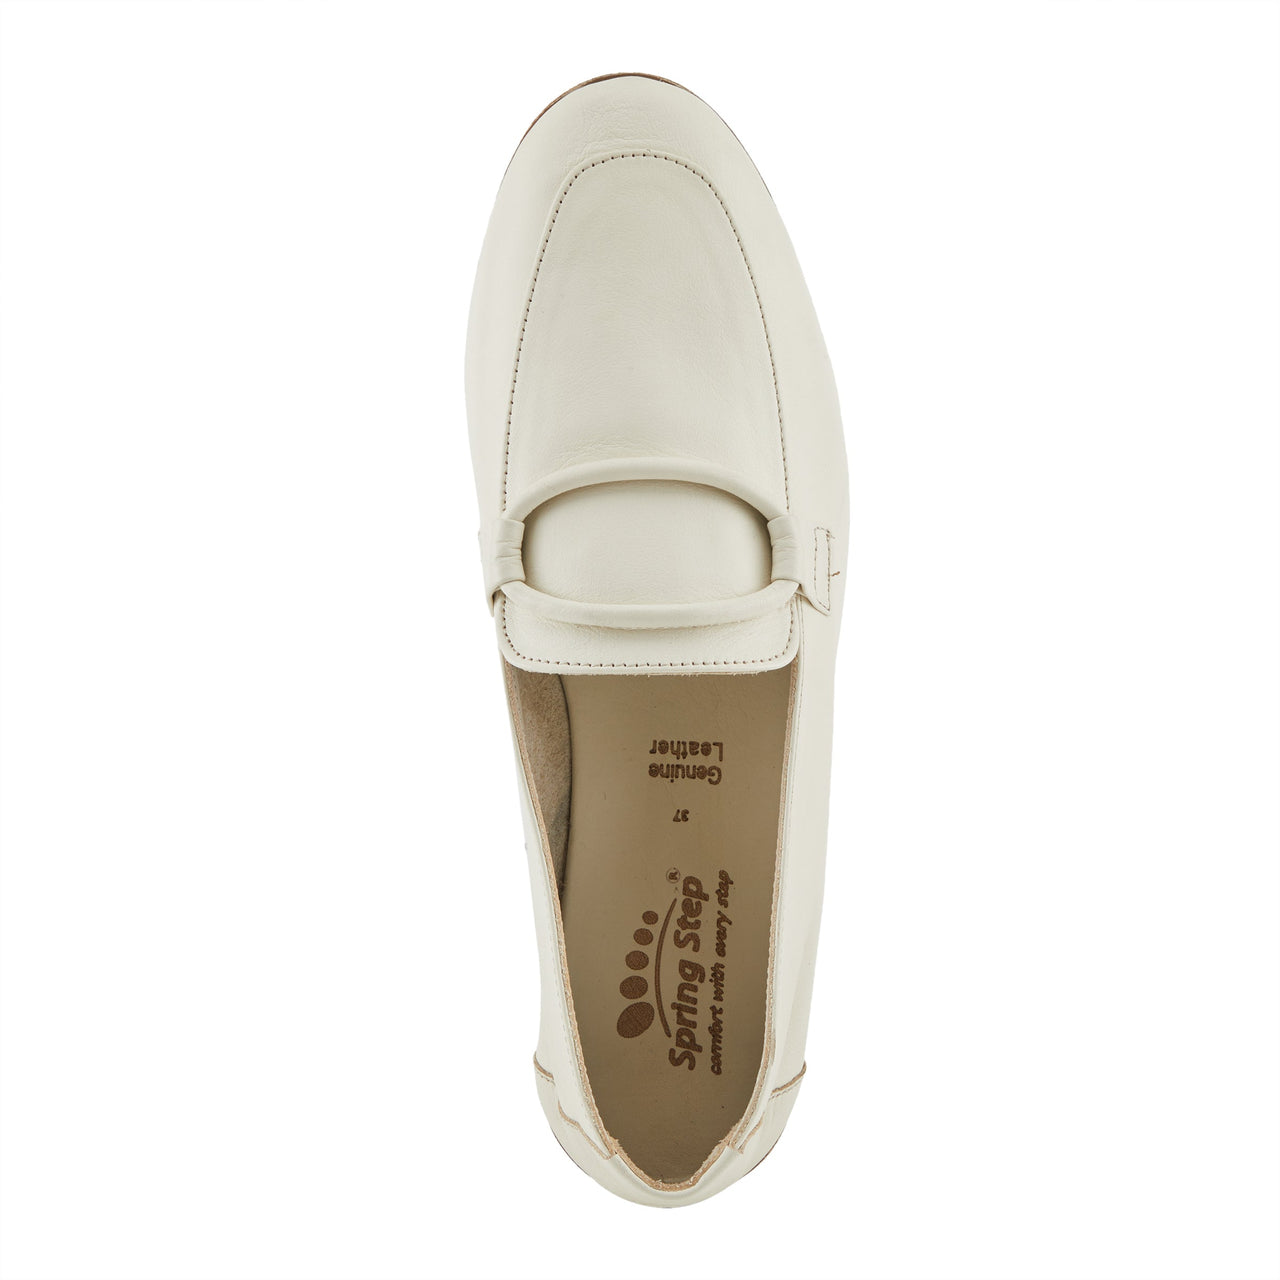 Black leather Spring Step Carrington shoes with slip-on design and cushioned insoles for all-day comfort and style